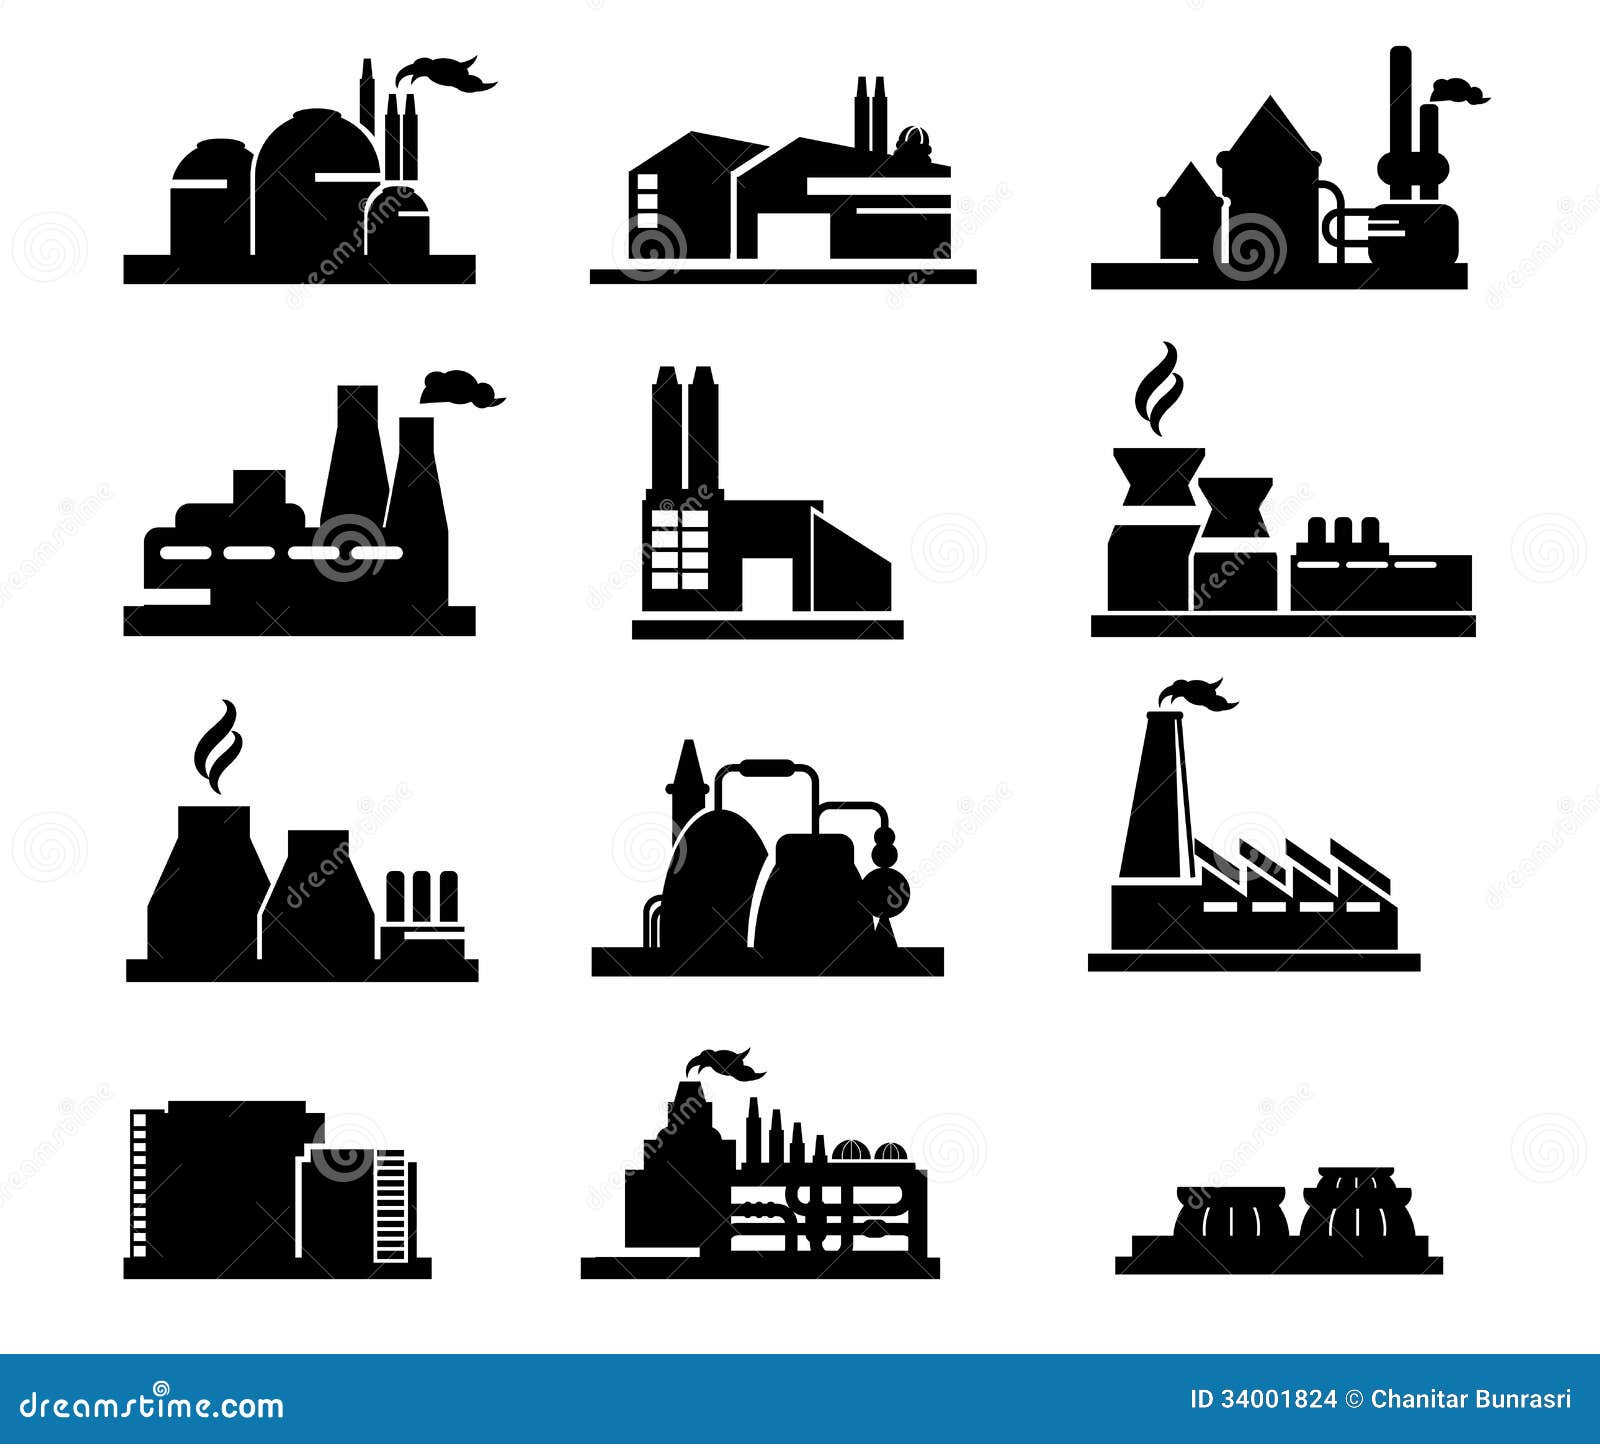 industrial clipart free download - photo #36